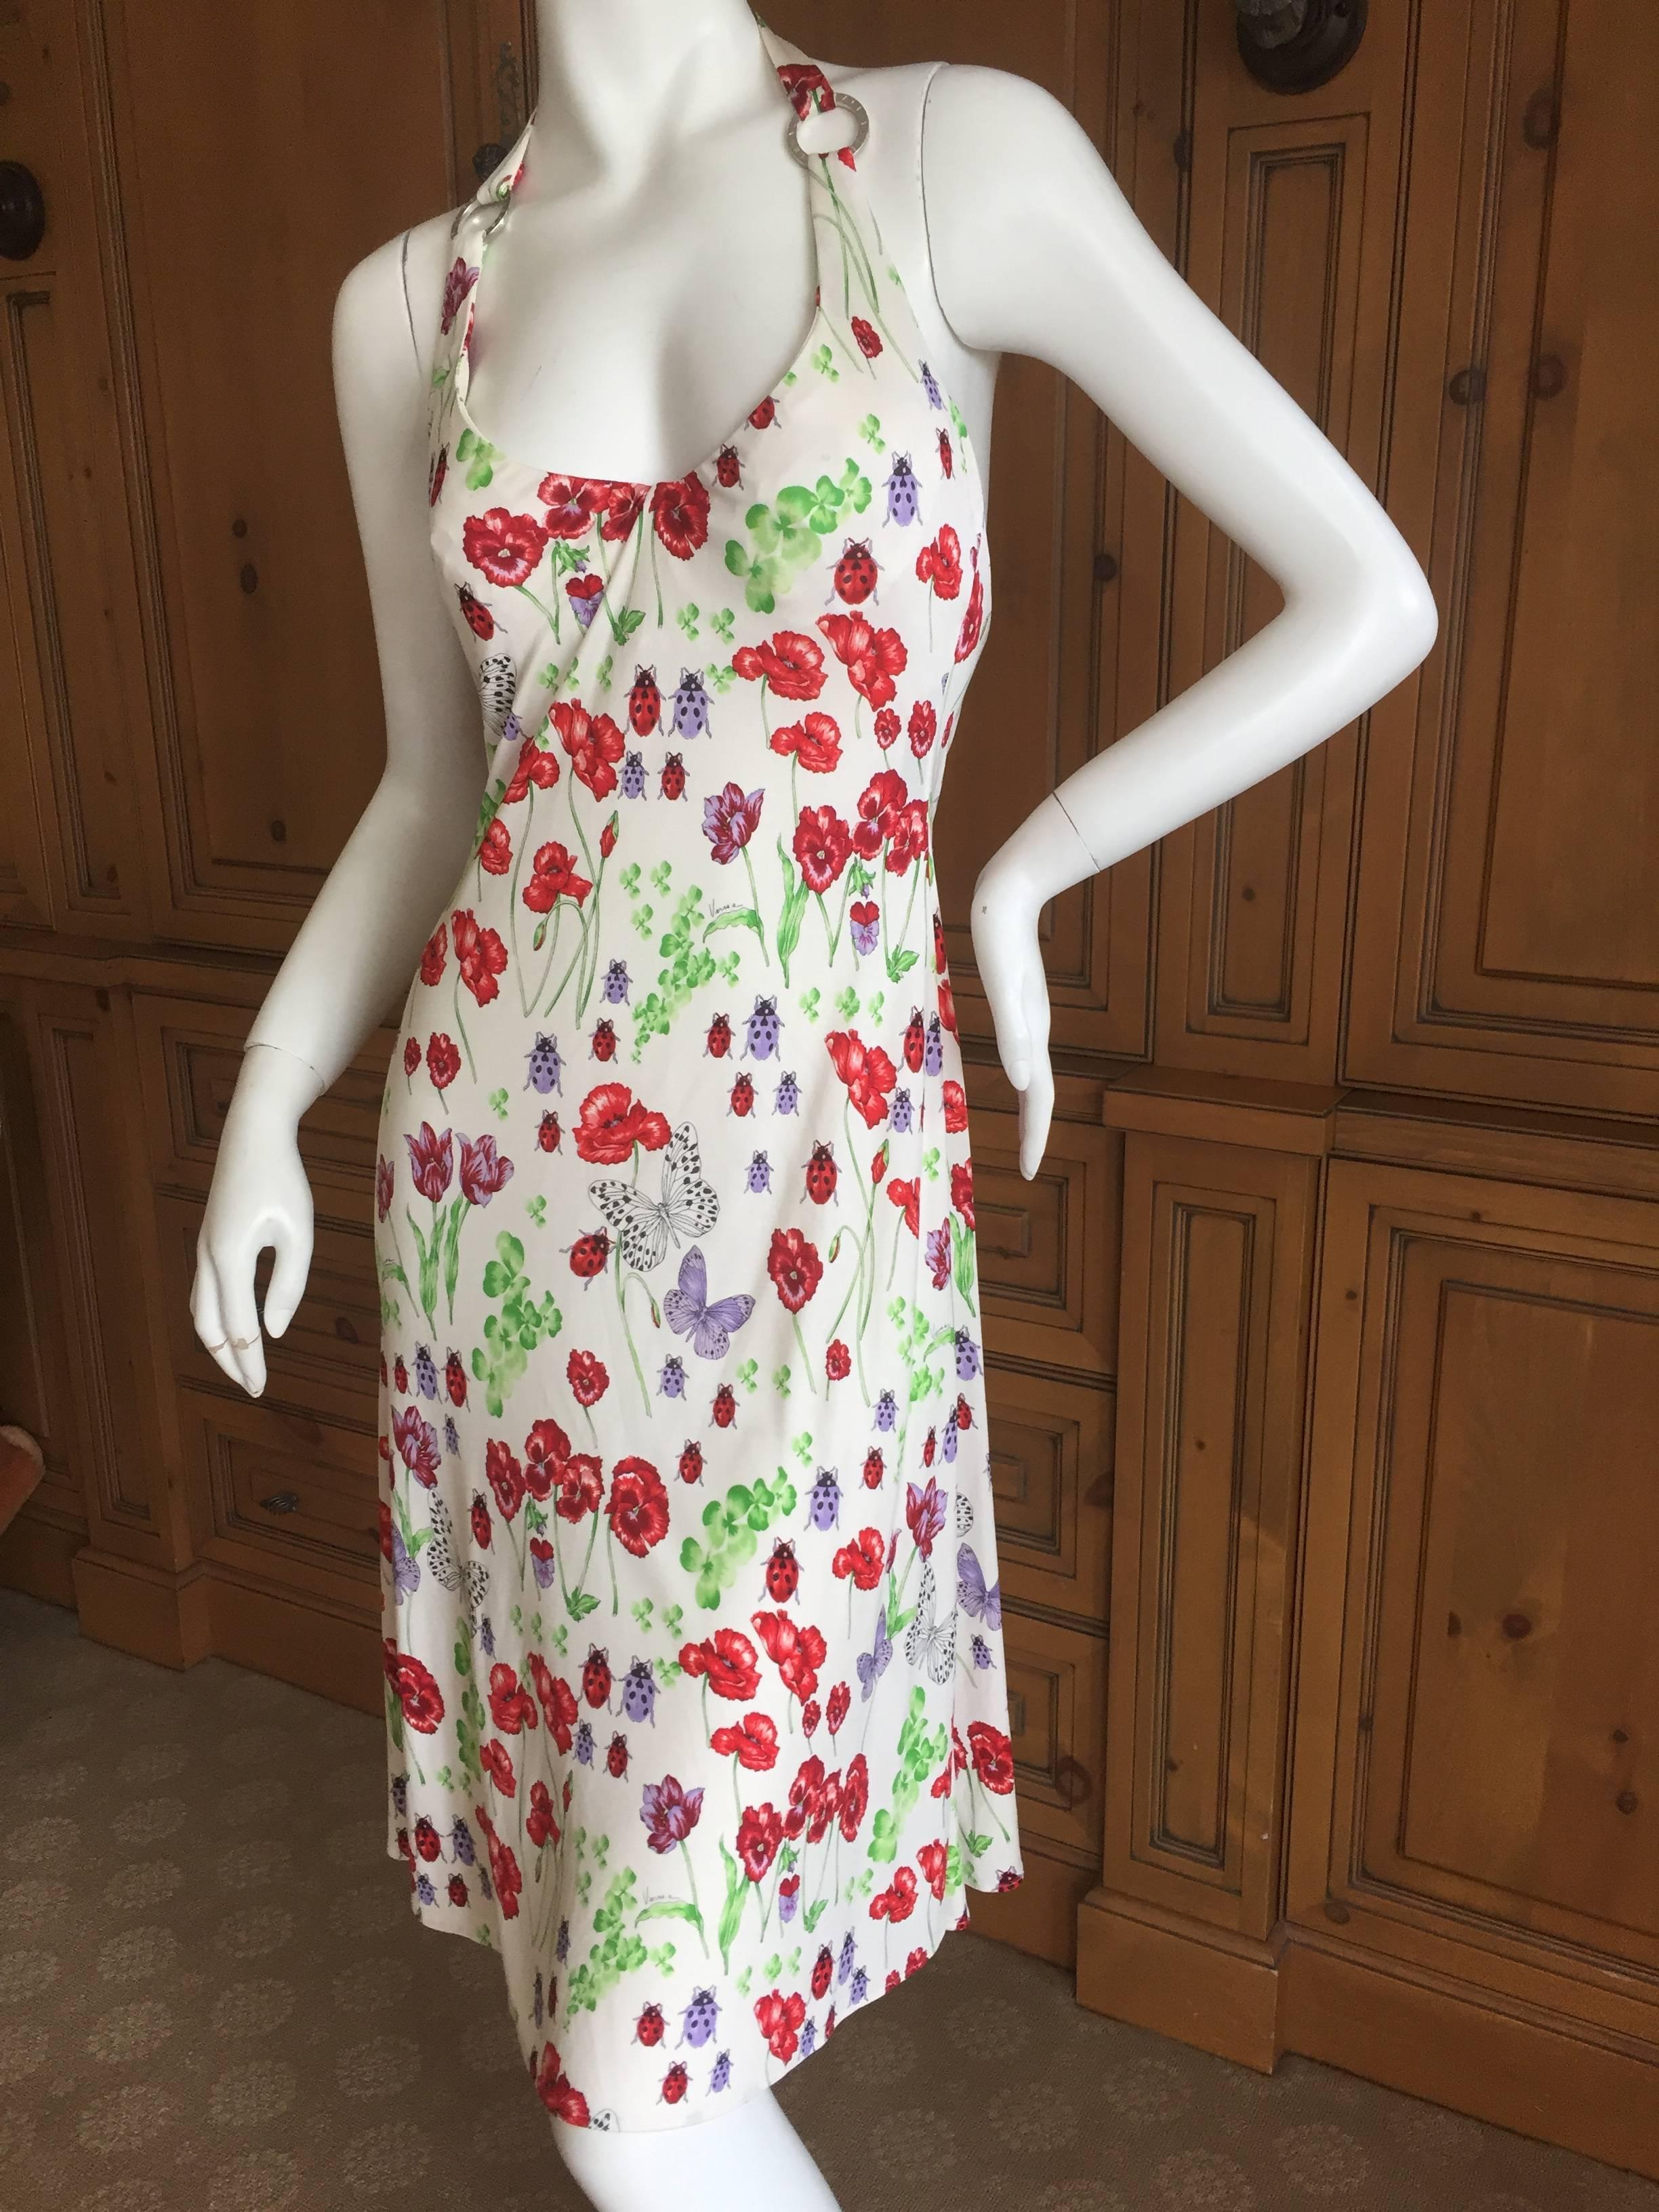 Versace Silk Jersey Dress with Pansy's and Ladybugs In Excellent Condition For Sale In Cloverdale, CA